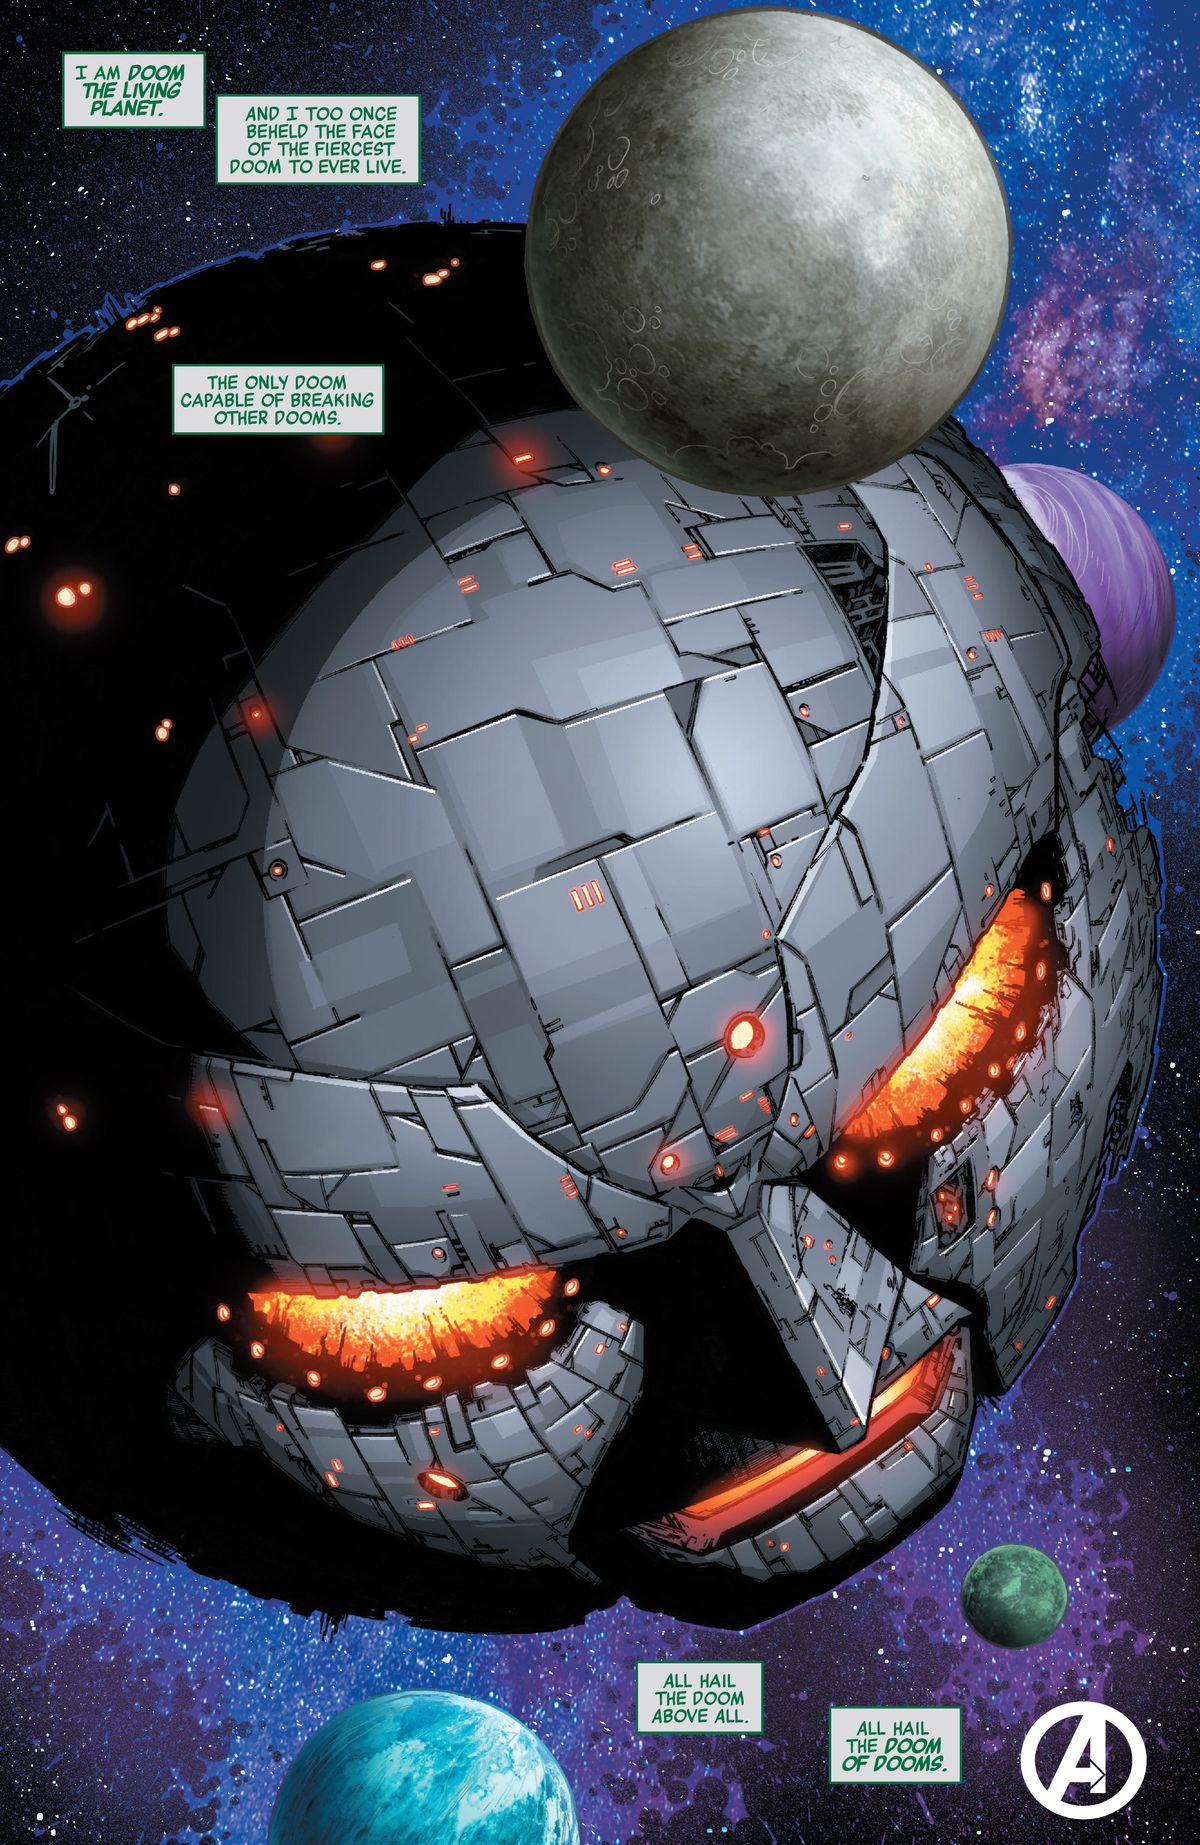 A living planet wearing a Doctor Doom mask monologues, “I am Doom the living planet, and I too once beheld the face of the fiercest Doom to ever live. The only Doom capable of breaking other Dooms. All hail the Doom Above All,” in Avengers Forever #5 (2022). 